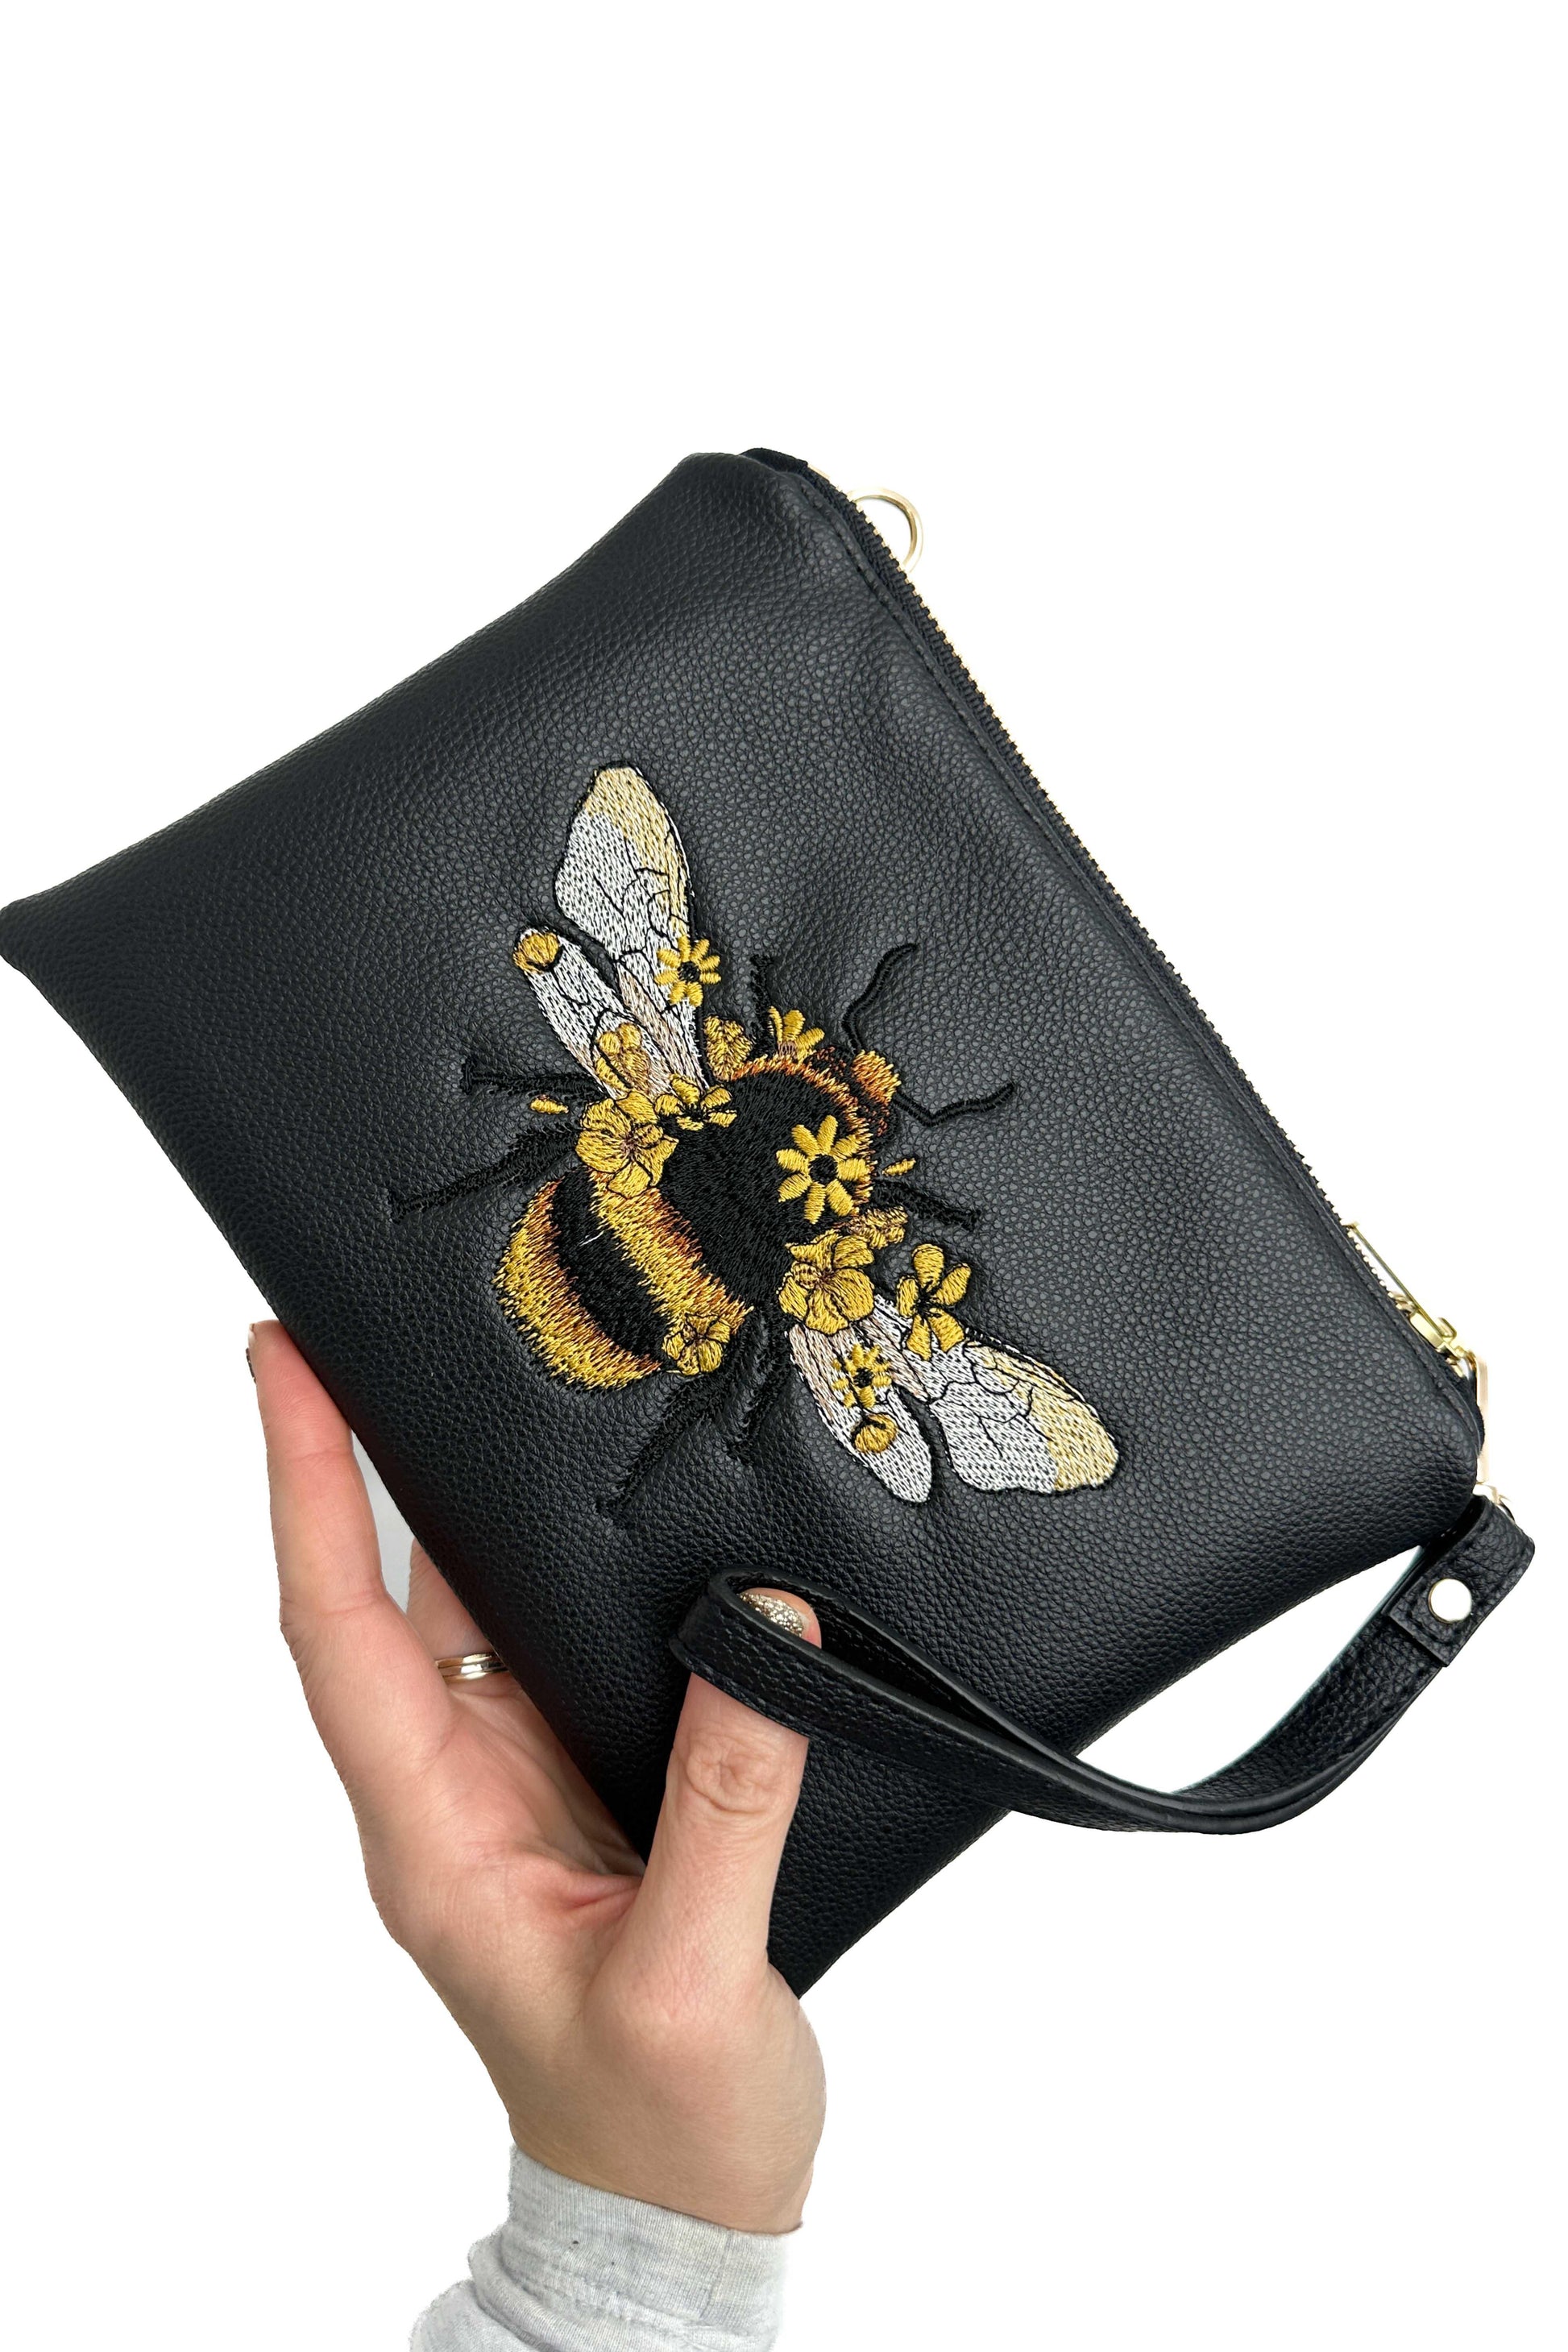 Classic Black "Queen Bee" Convertible Crossbody Wristlet+ with Compartments READY TO SHIP - Modern Makerie